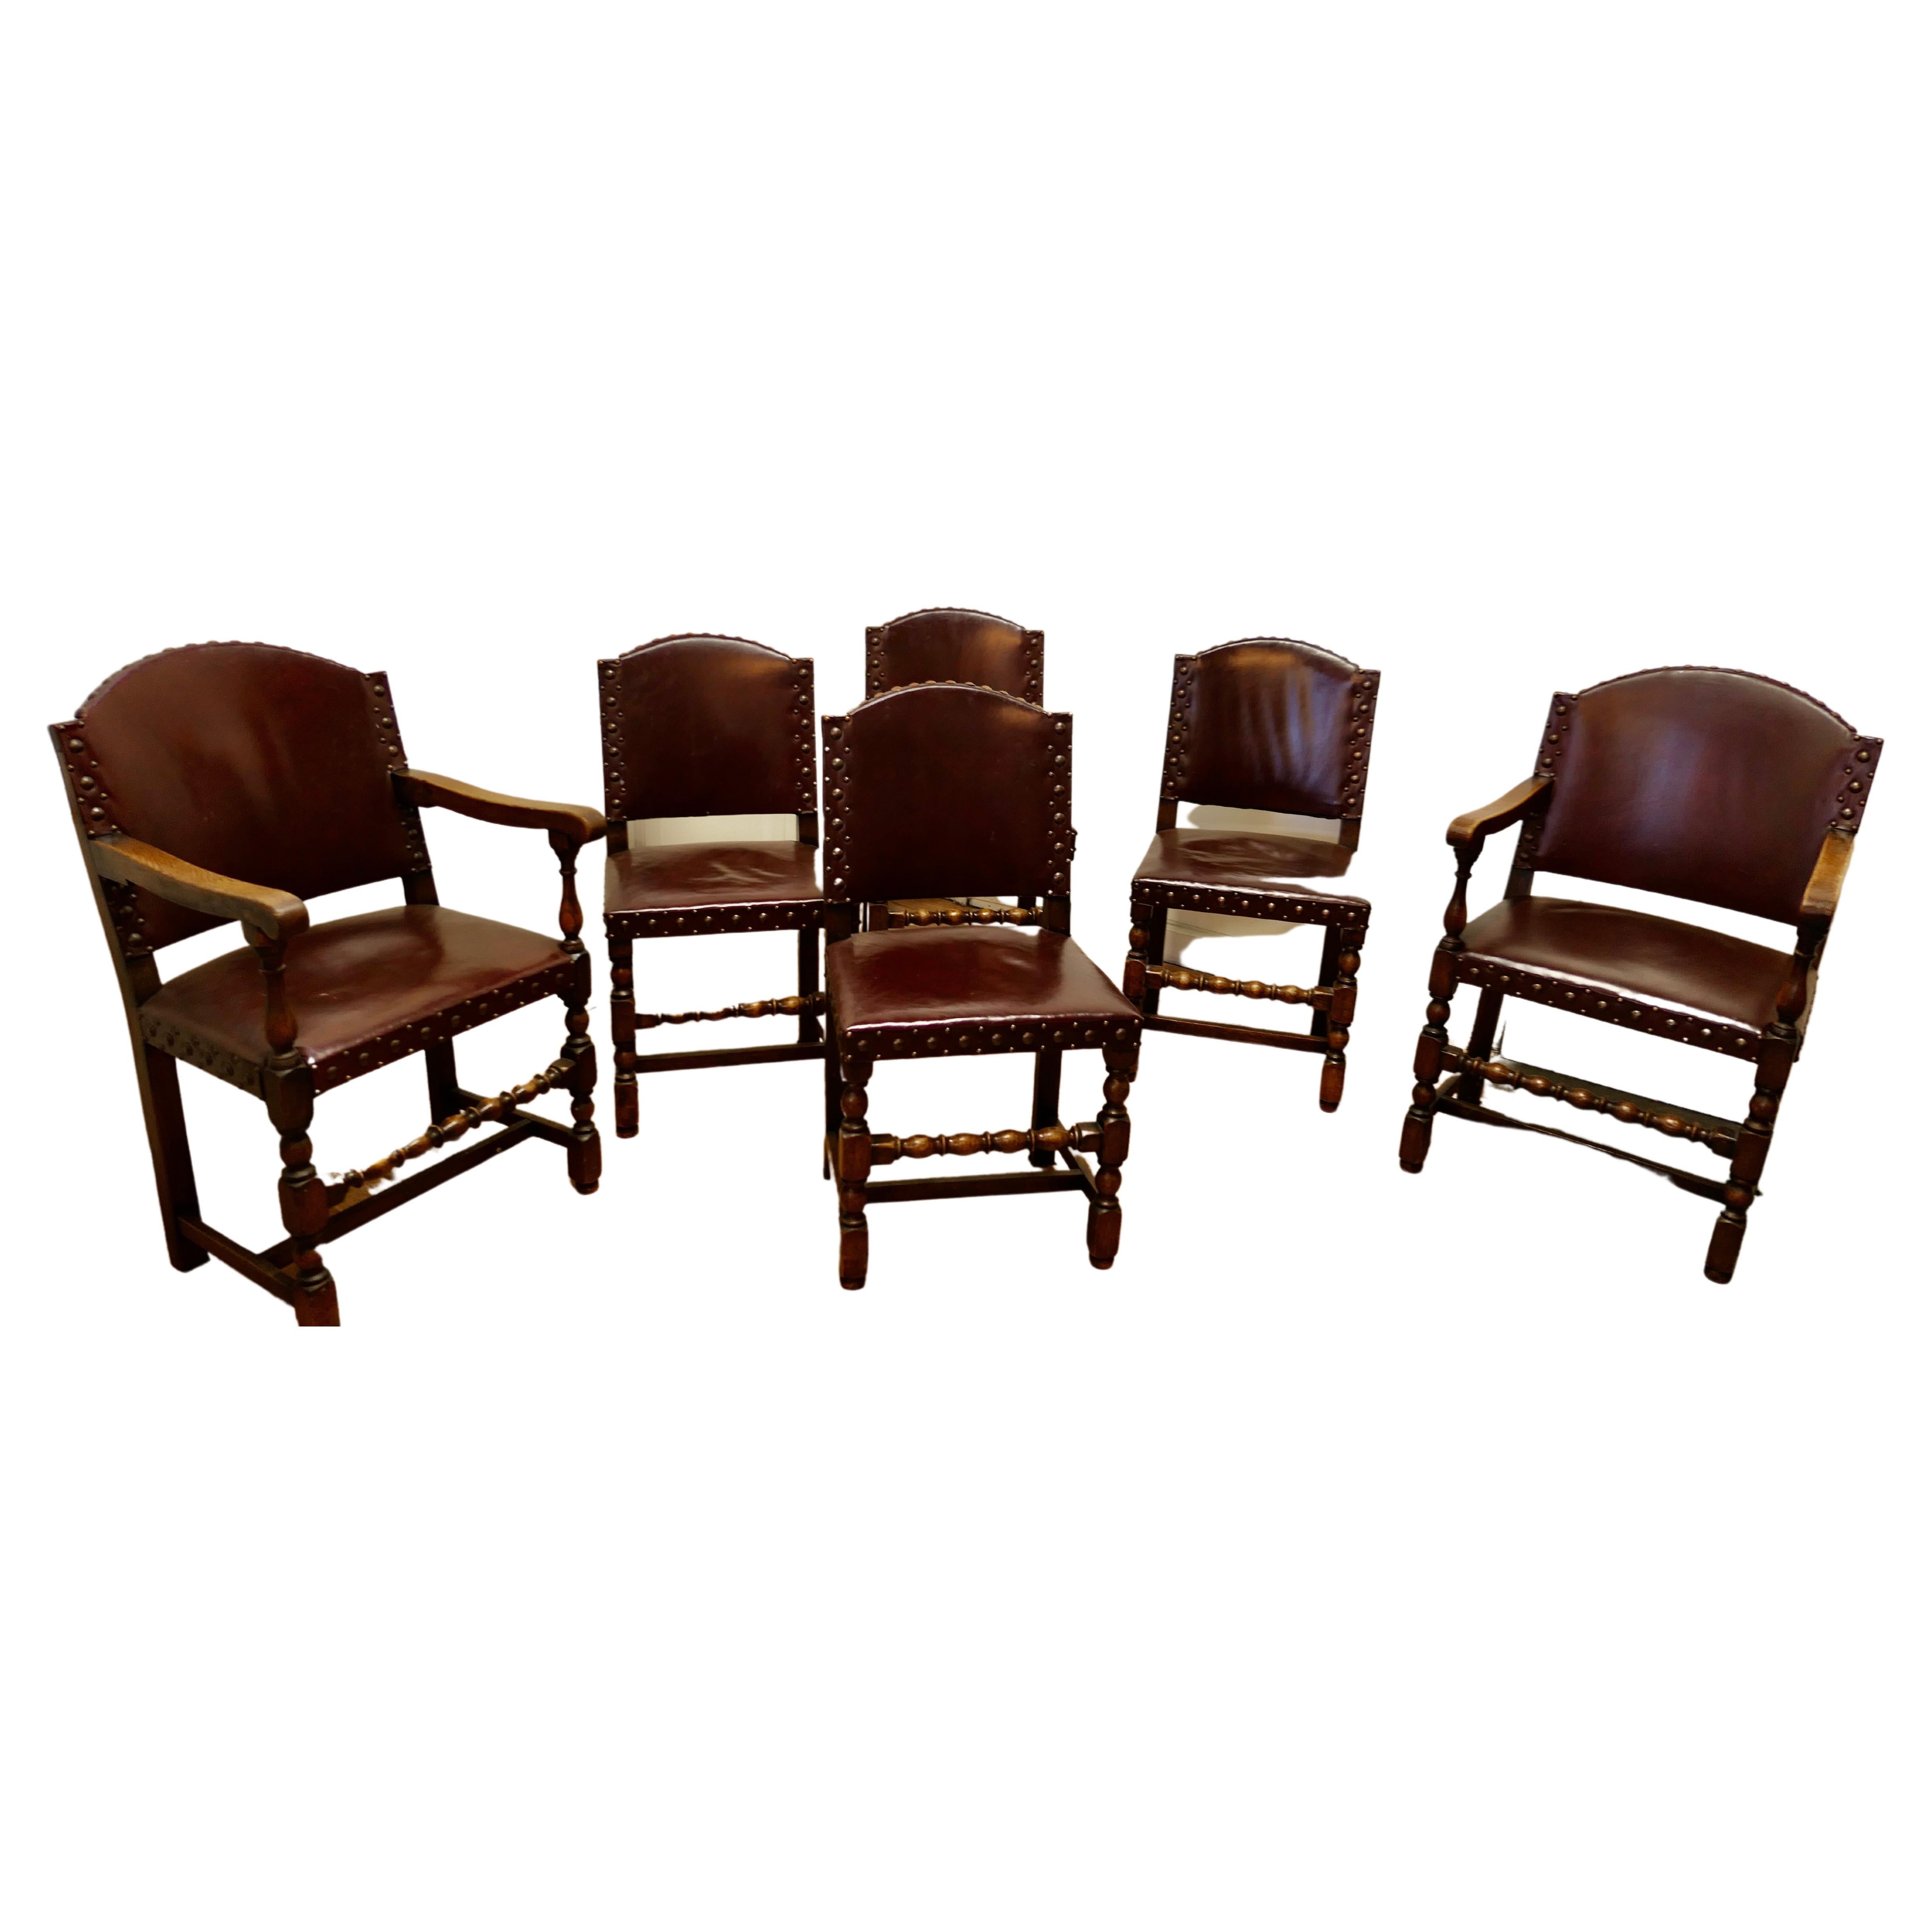 Set of 6 Heavy Arts and Crafts Gothic Oak and Leather Dining or Boardroom Chairs